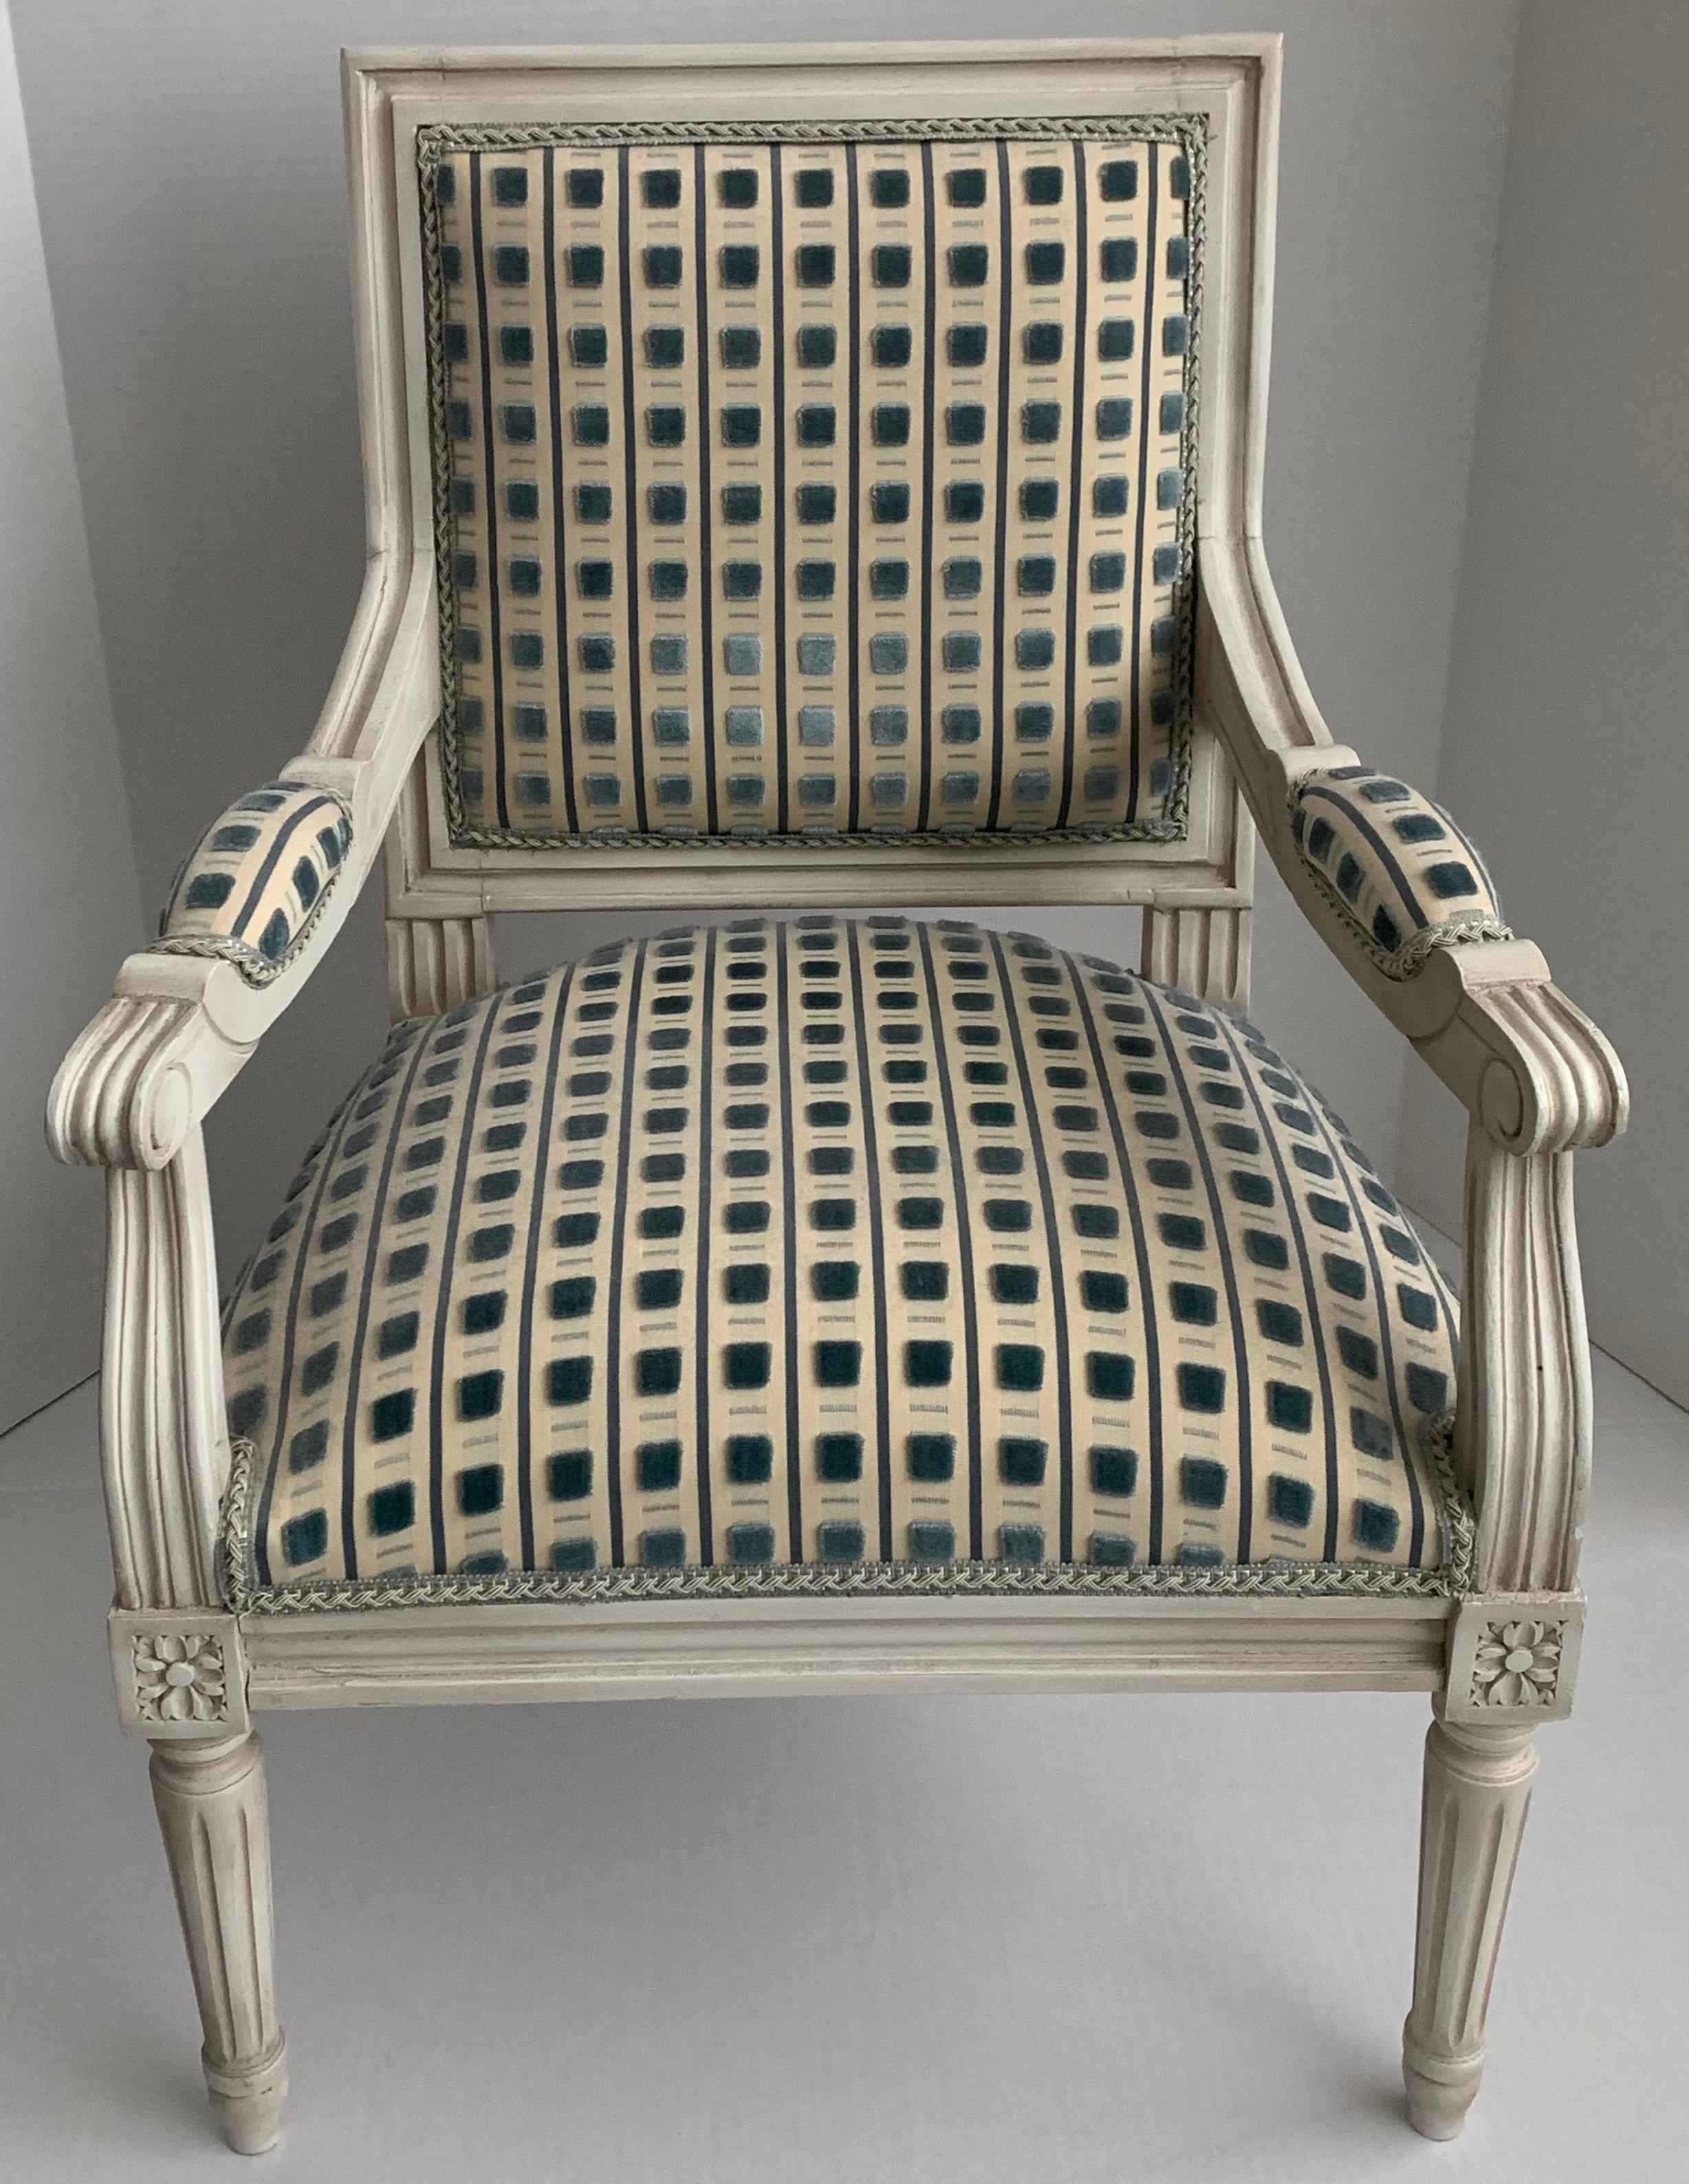 Custom made French Louis XVI style children’s size armchair. Painted in a cream colored antique finish and upholstered in Scalamandre “Pitti” cut velvet in blue on cream background. Braided tape trim to match. Chair back is upholstered in